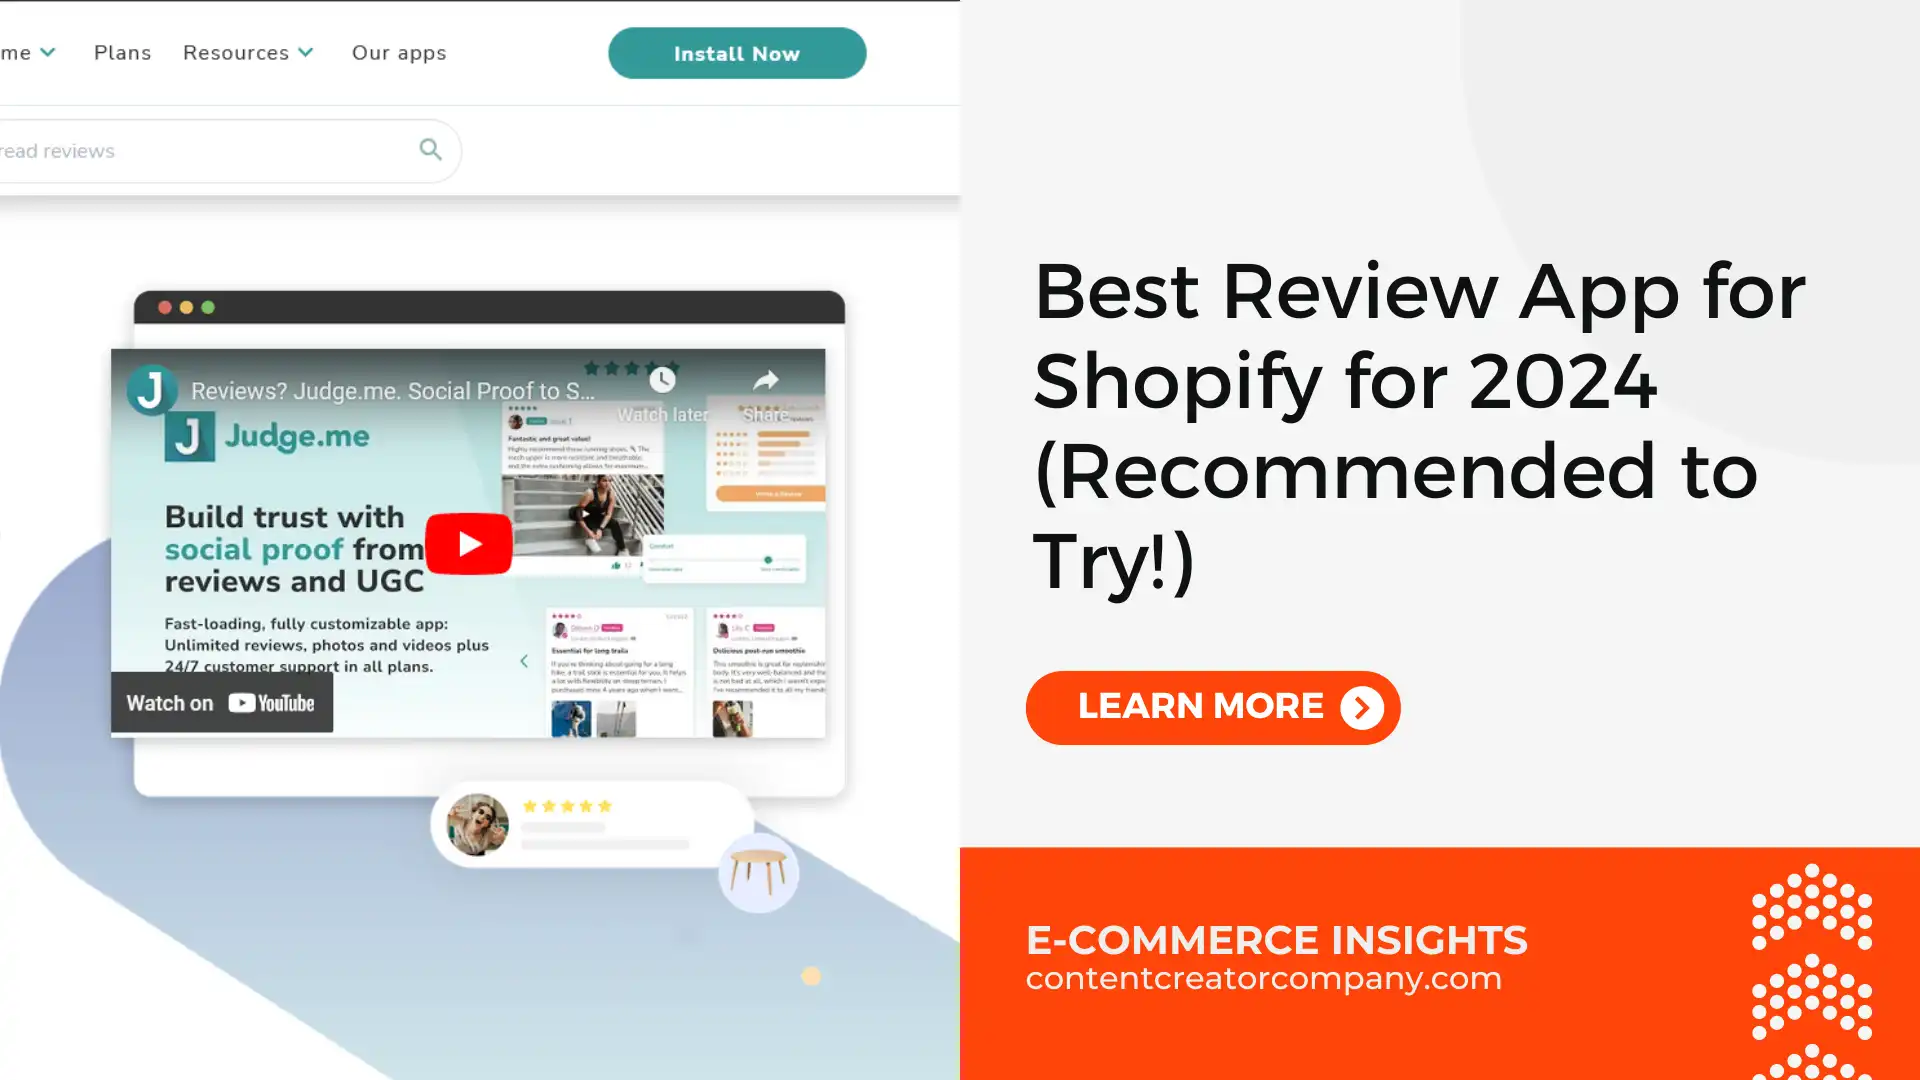 Best Review App for Shopify for 2024 (Recommended to Try!)